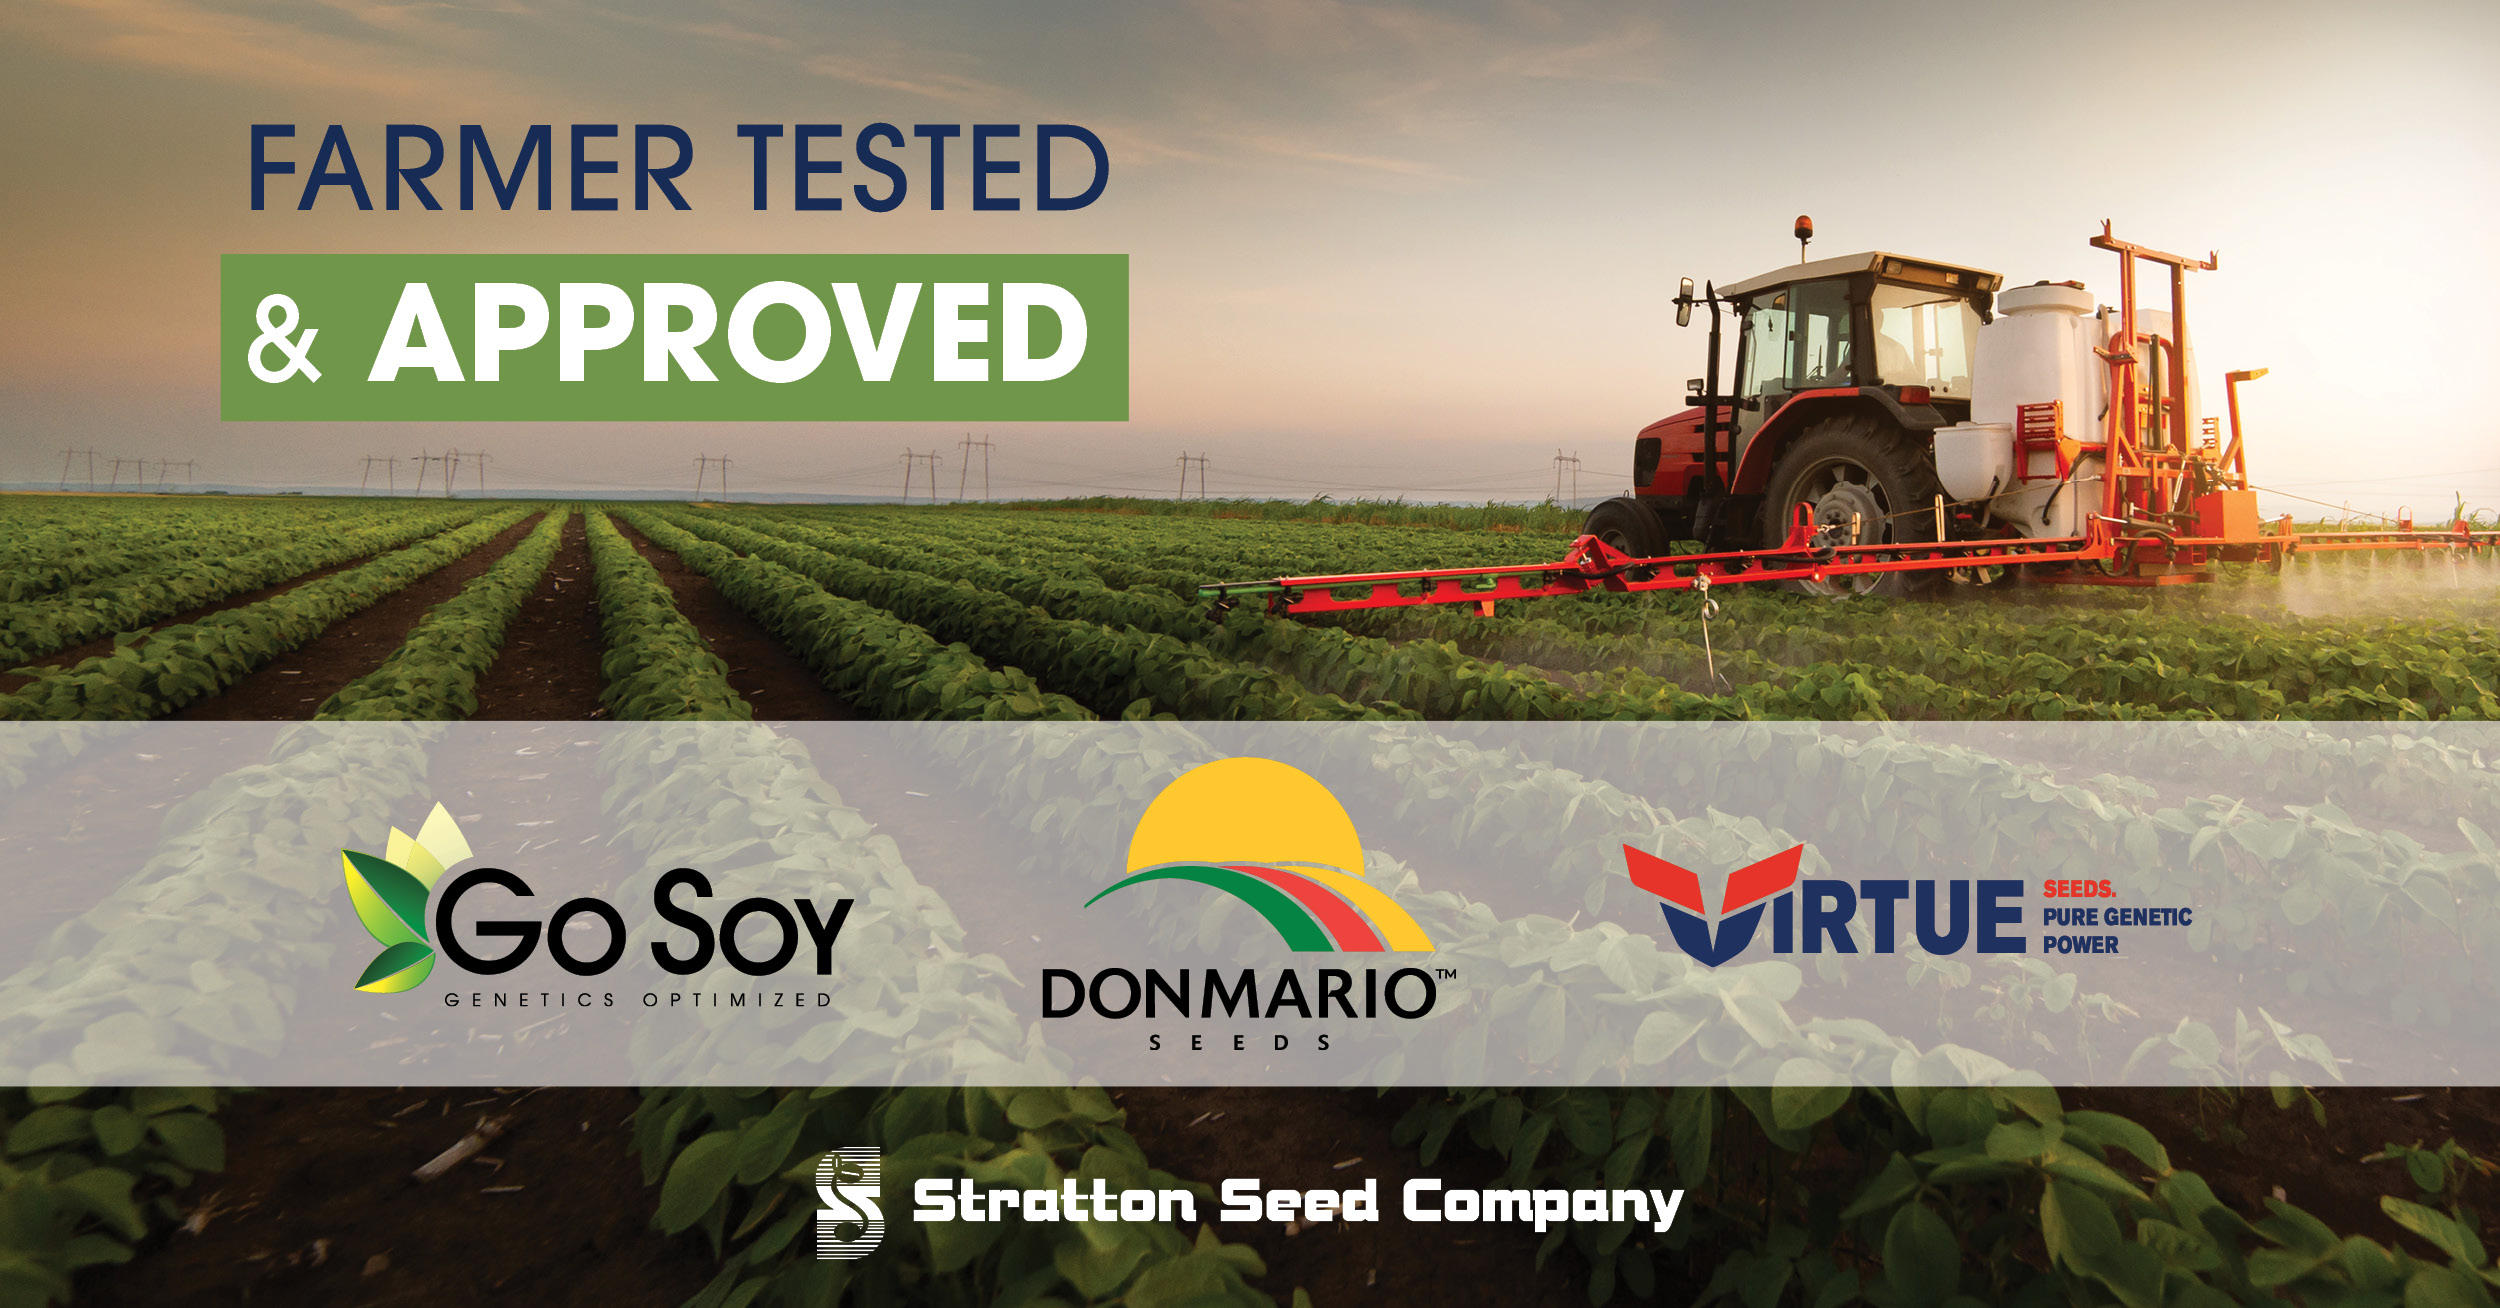 Soybean Facebook ad featuring Stratton's main soybean brands 